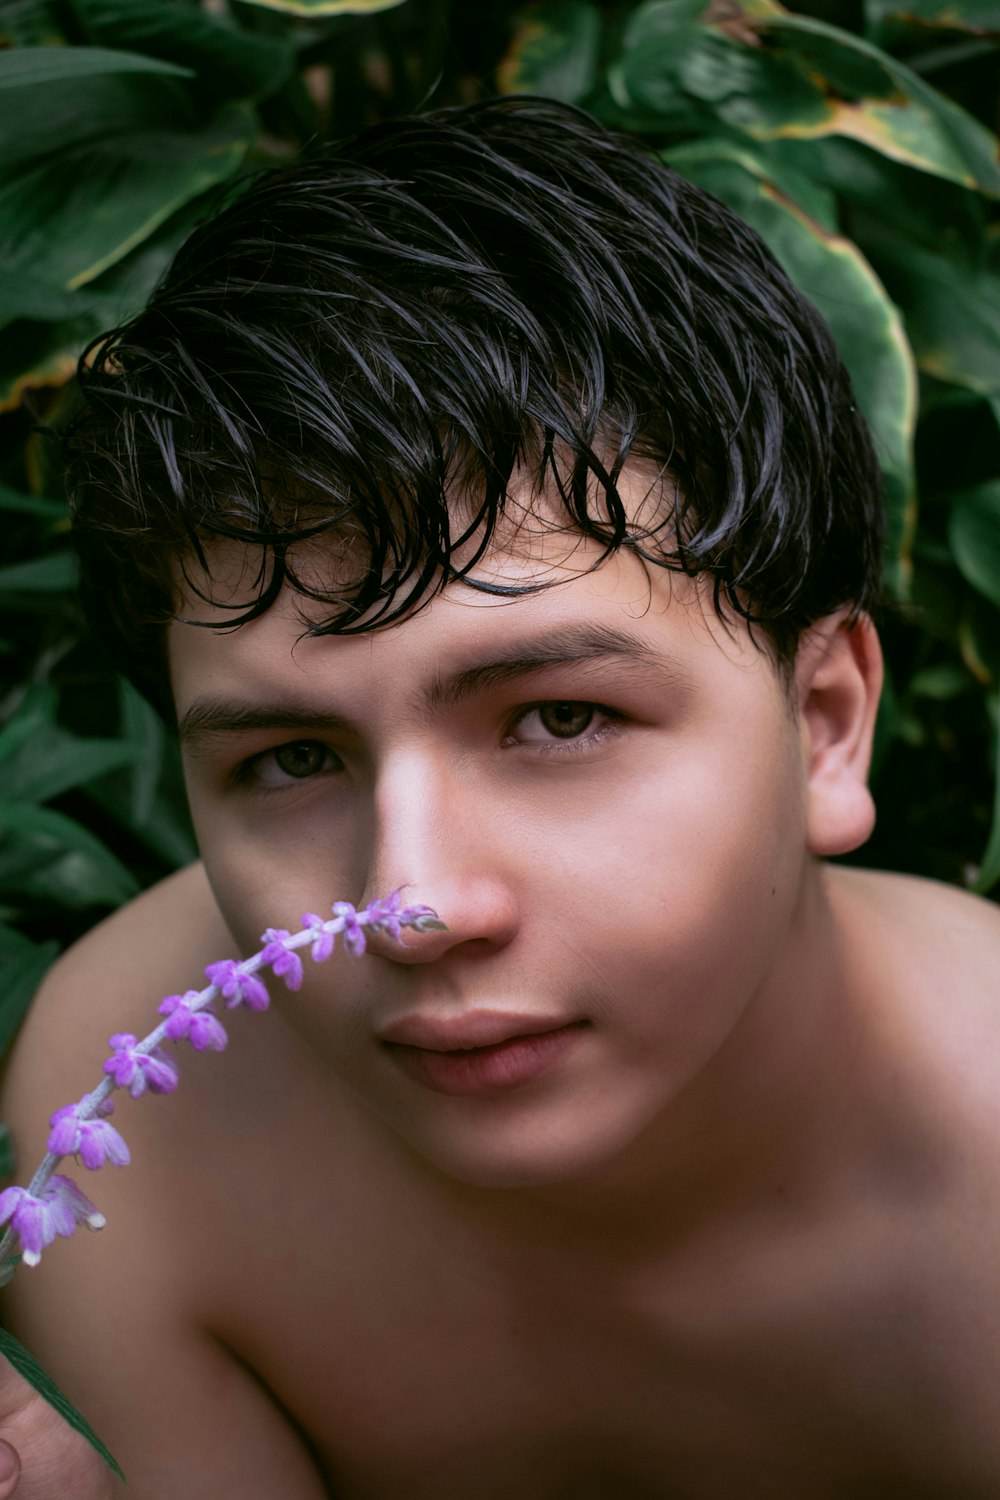 topless boy with purple flower on his ear